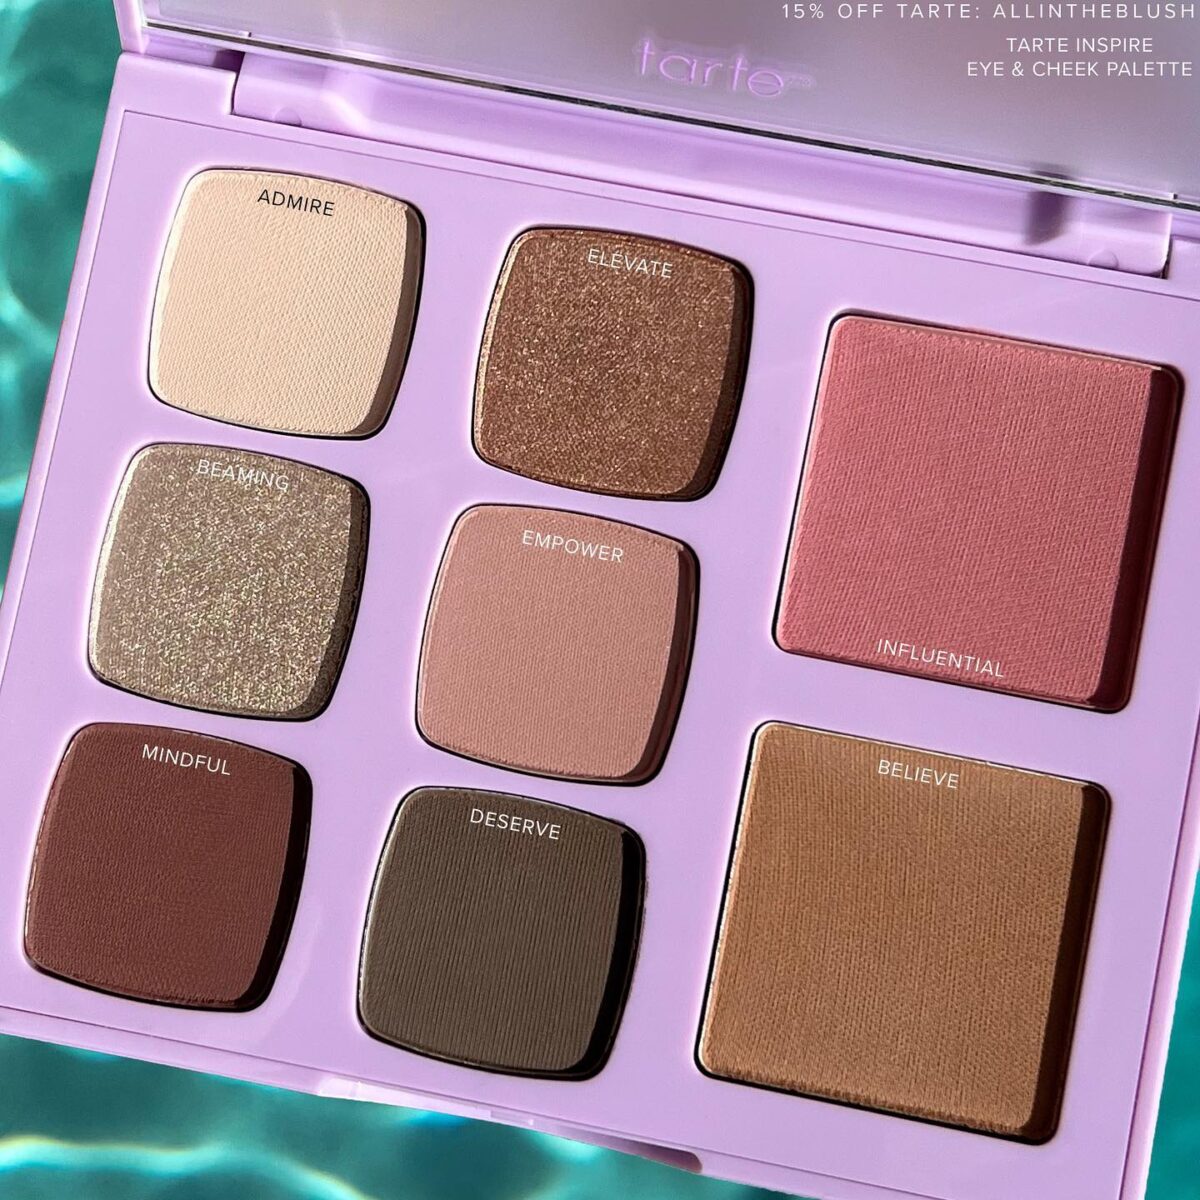 Tarte Inspire Amazonian Clay Eye & Cheek Palette Review & Swatches + Save 15% off Tarte with Code: ALLINTHEBLUSH